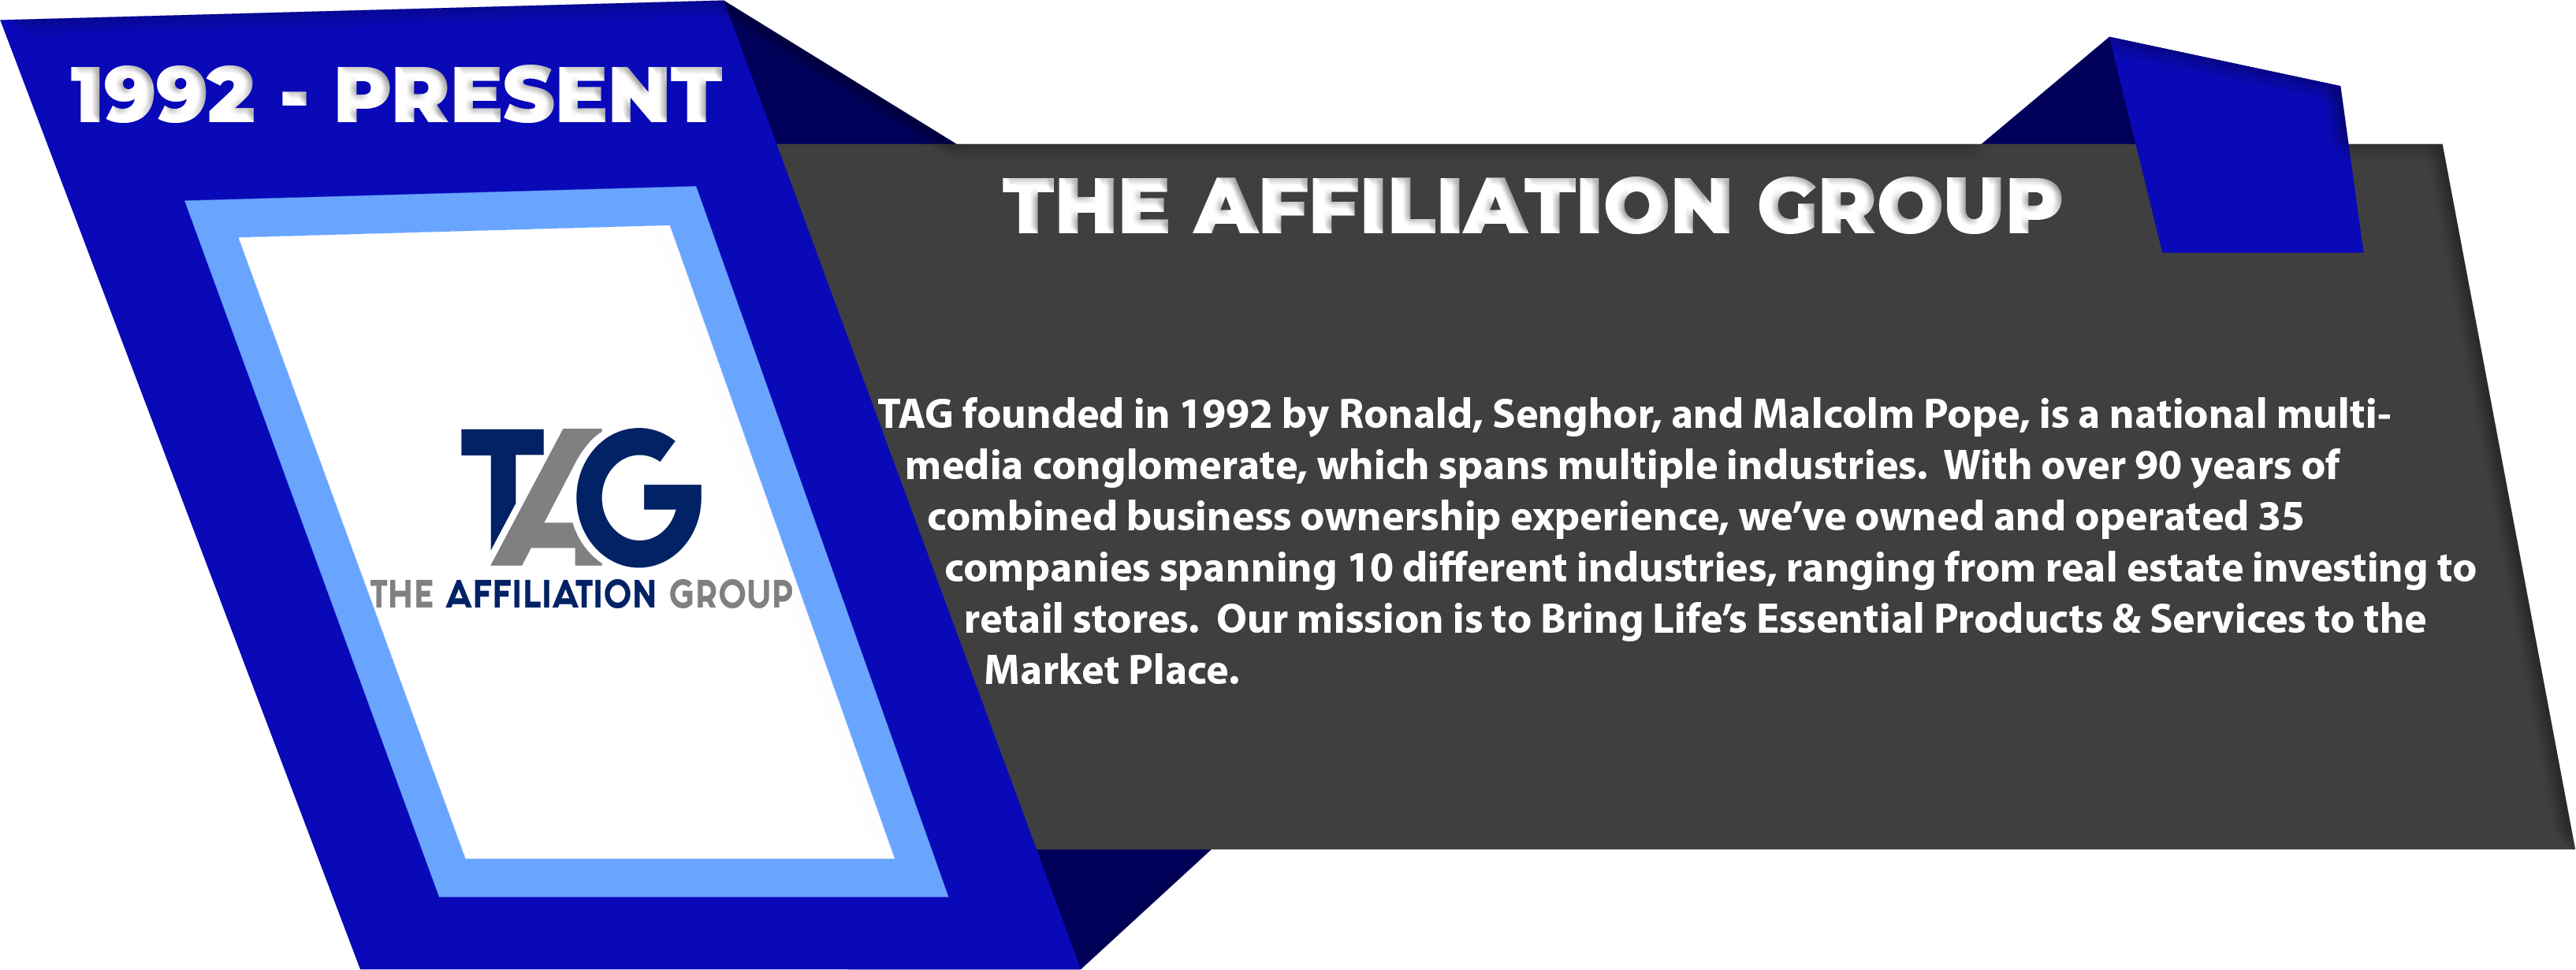 The-affiliation-group-1992-Present-2 (1)